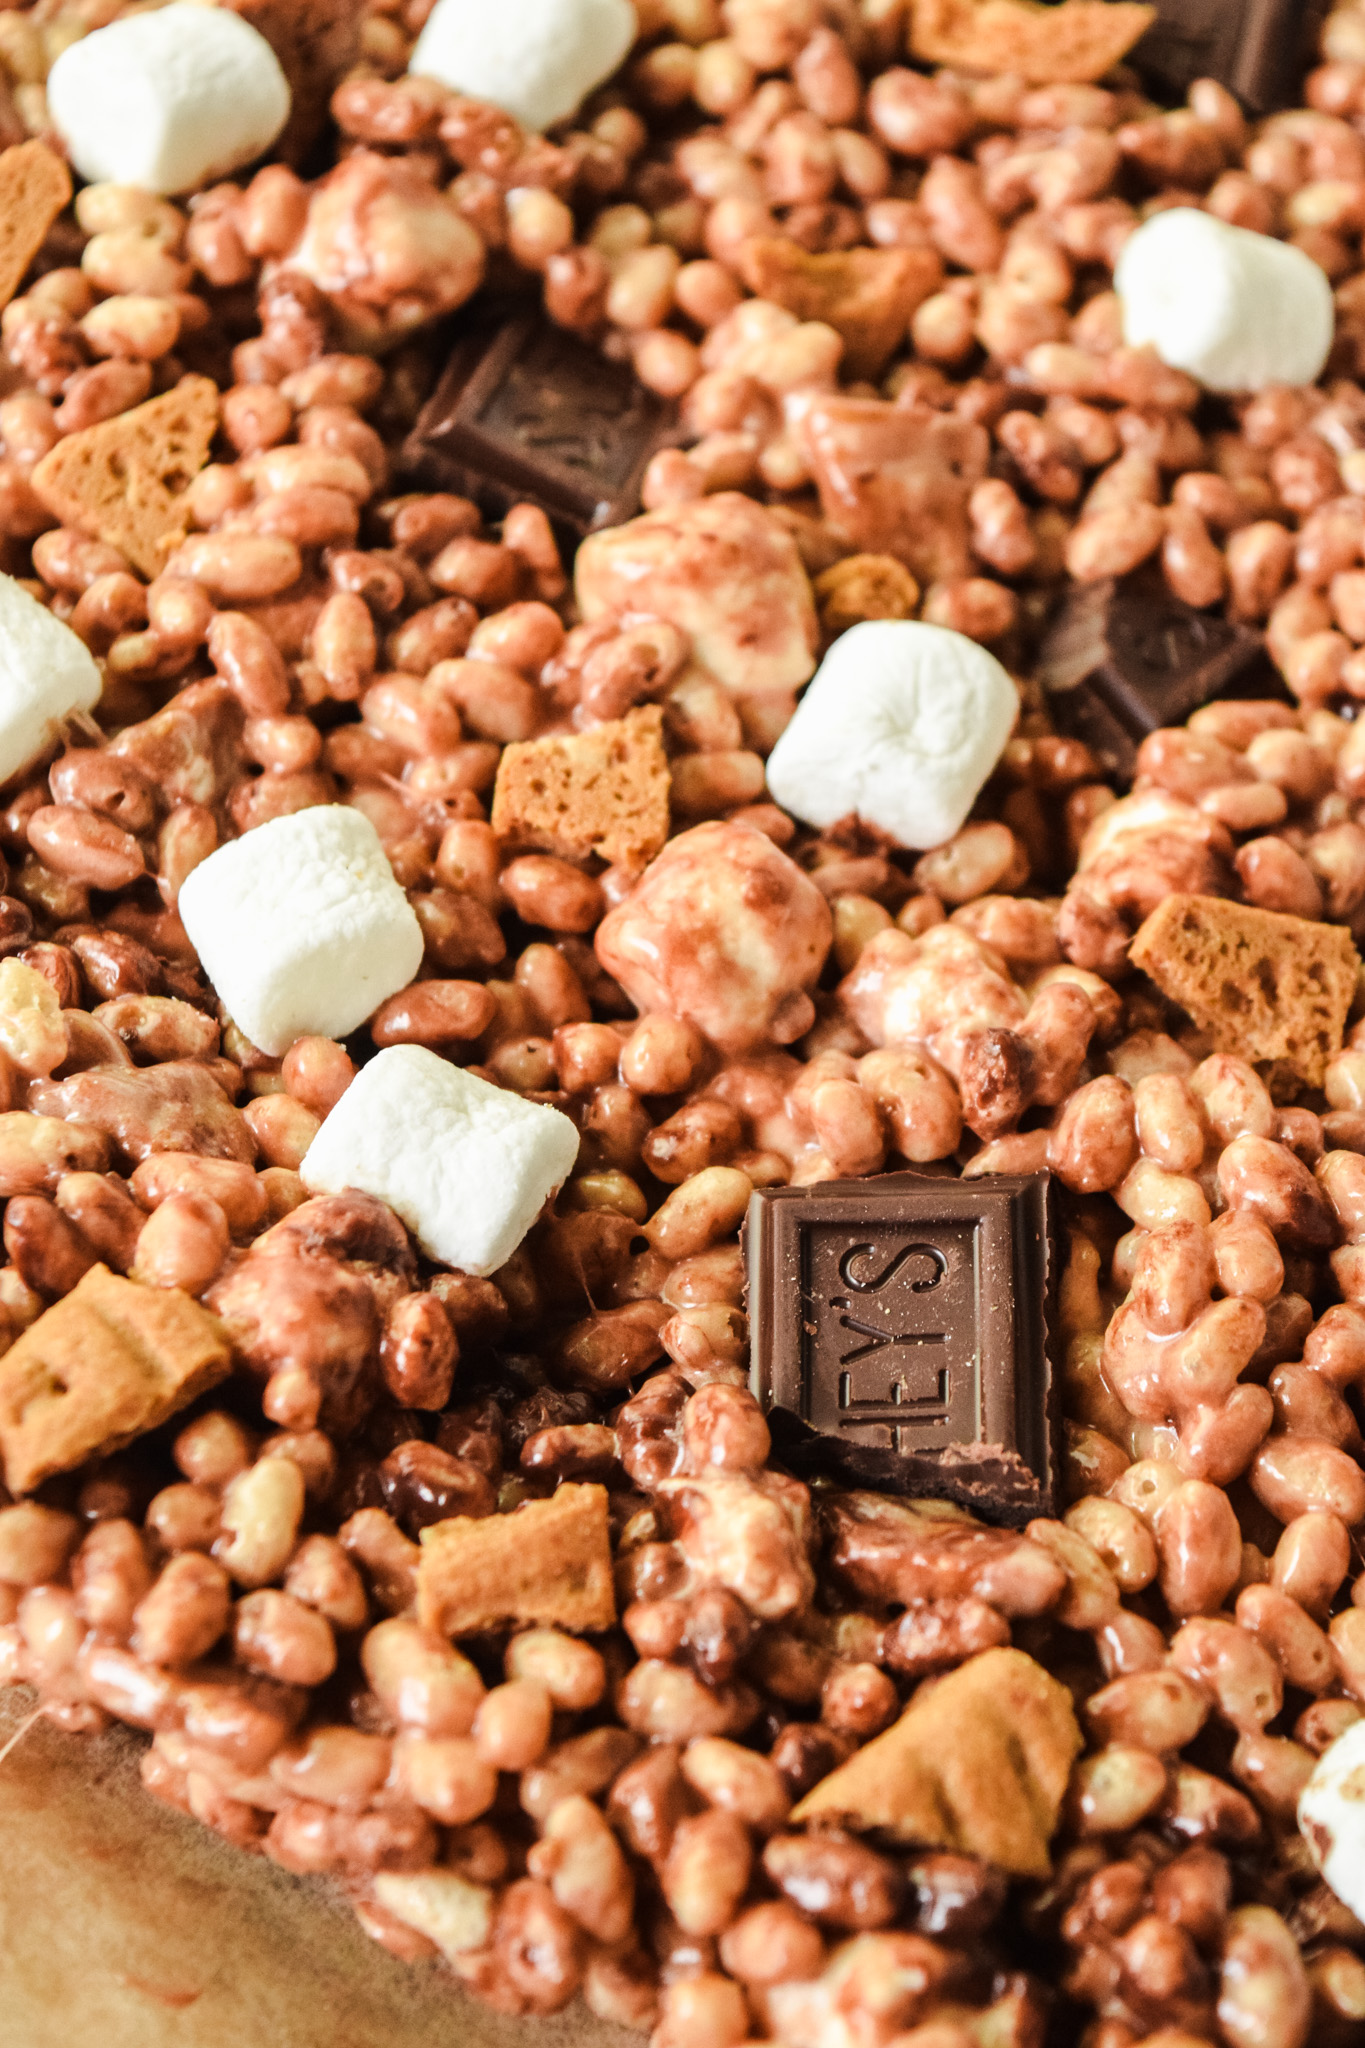 S'mores Rice Krispies Treats with Hershey's chocolate and marshmallows